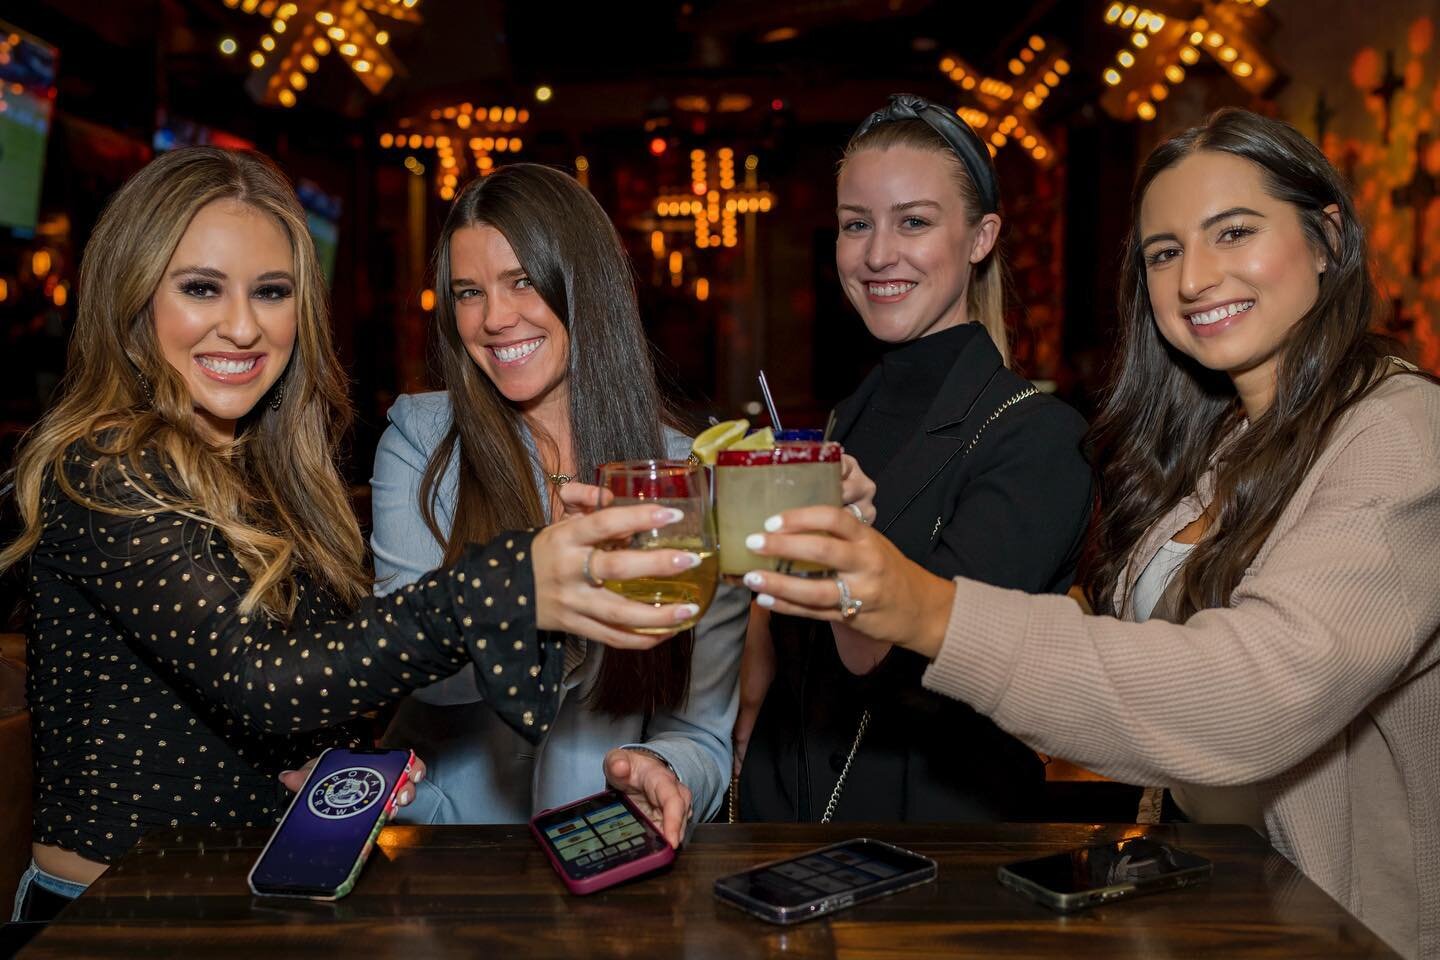 CHEERS to being halfway through the week! 

Join us on our Daily Bar Crawl through The LINQ Promenade. Use code LINQ40 for 40% off!